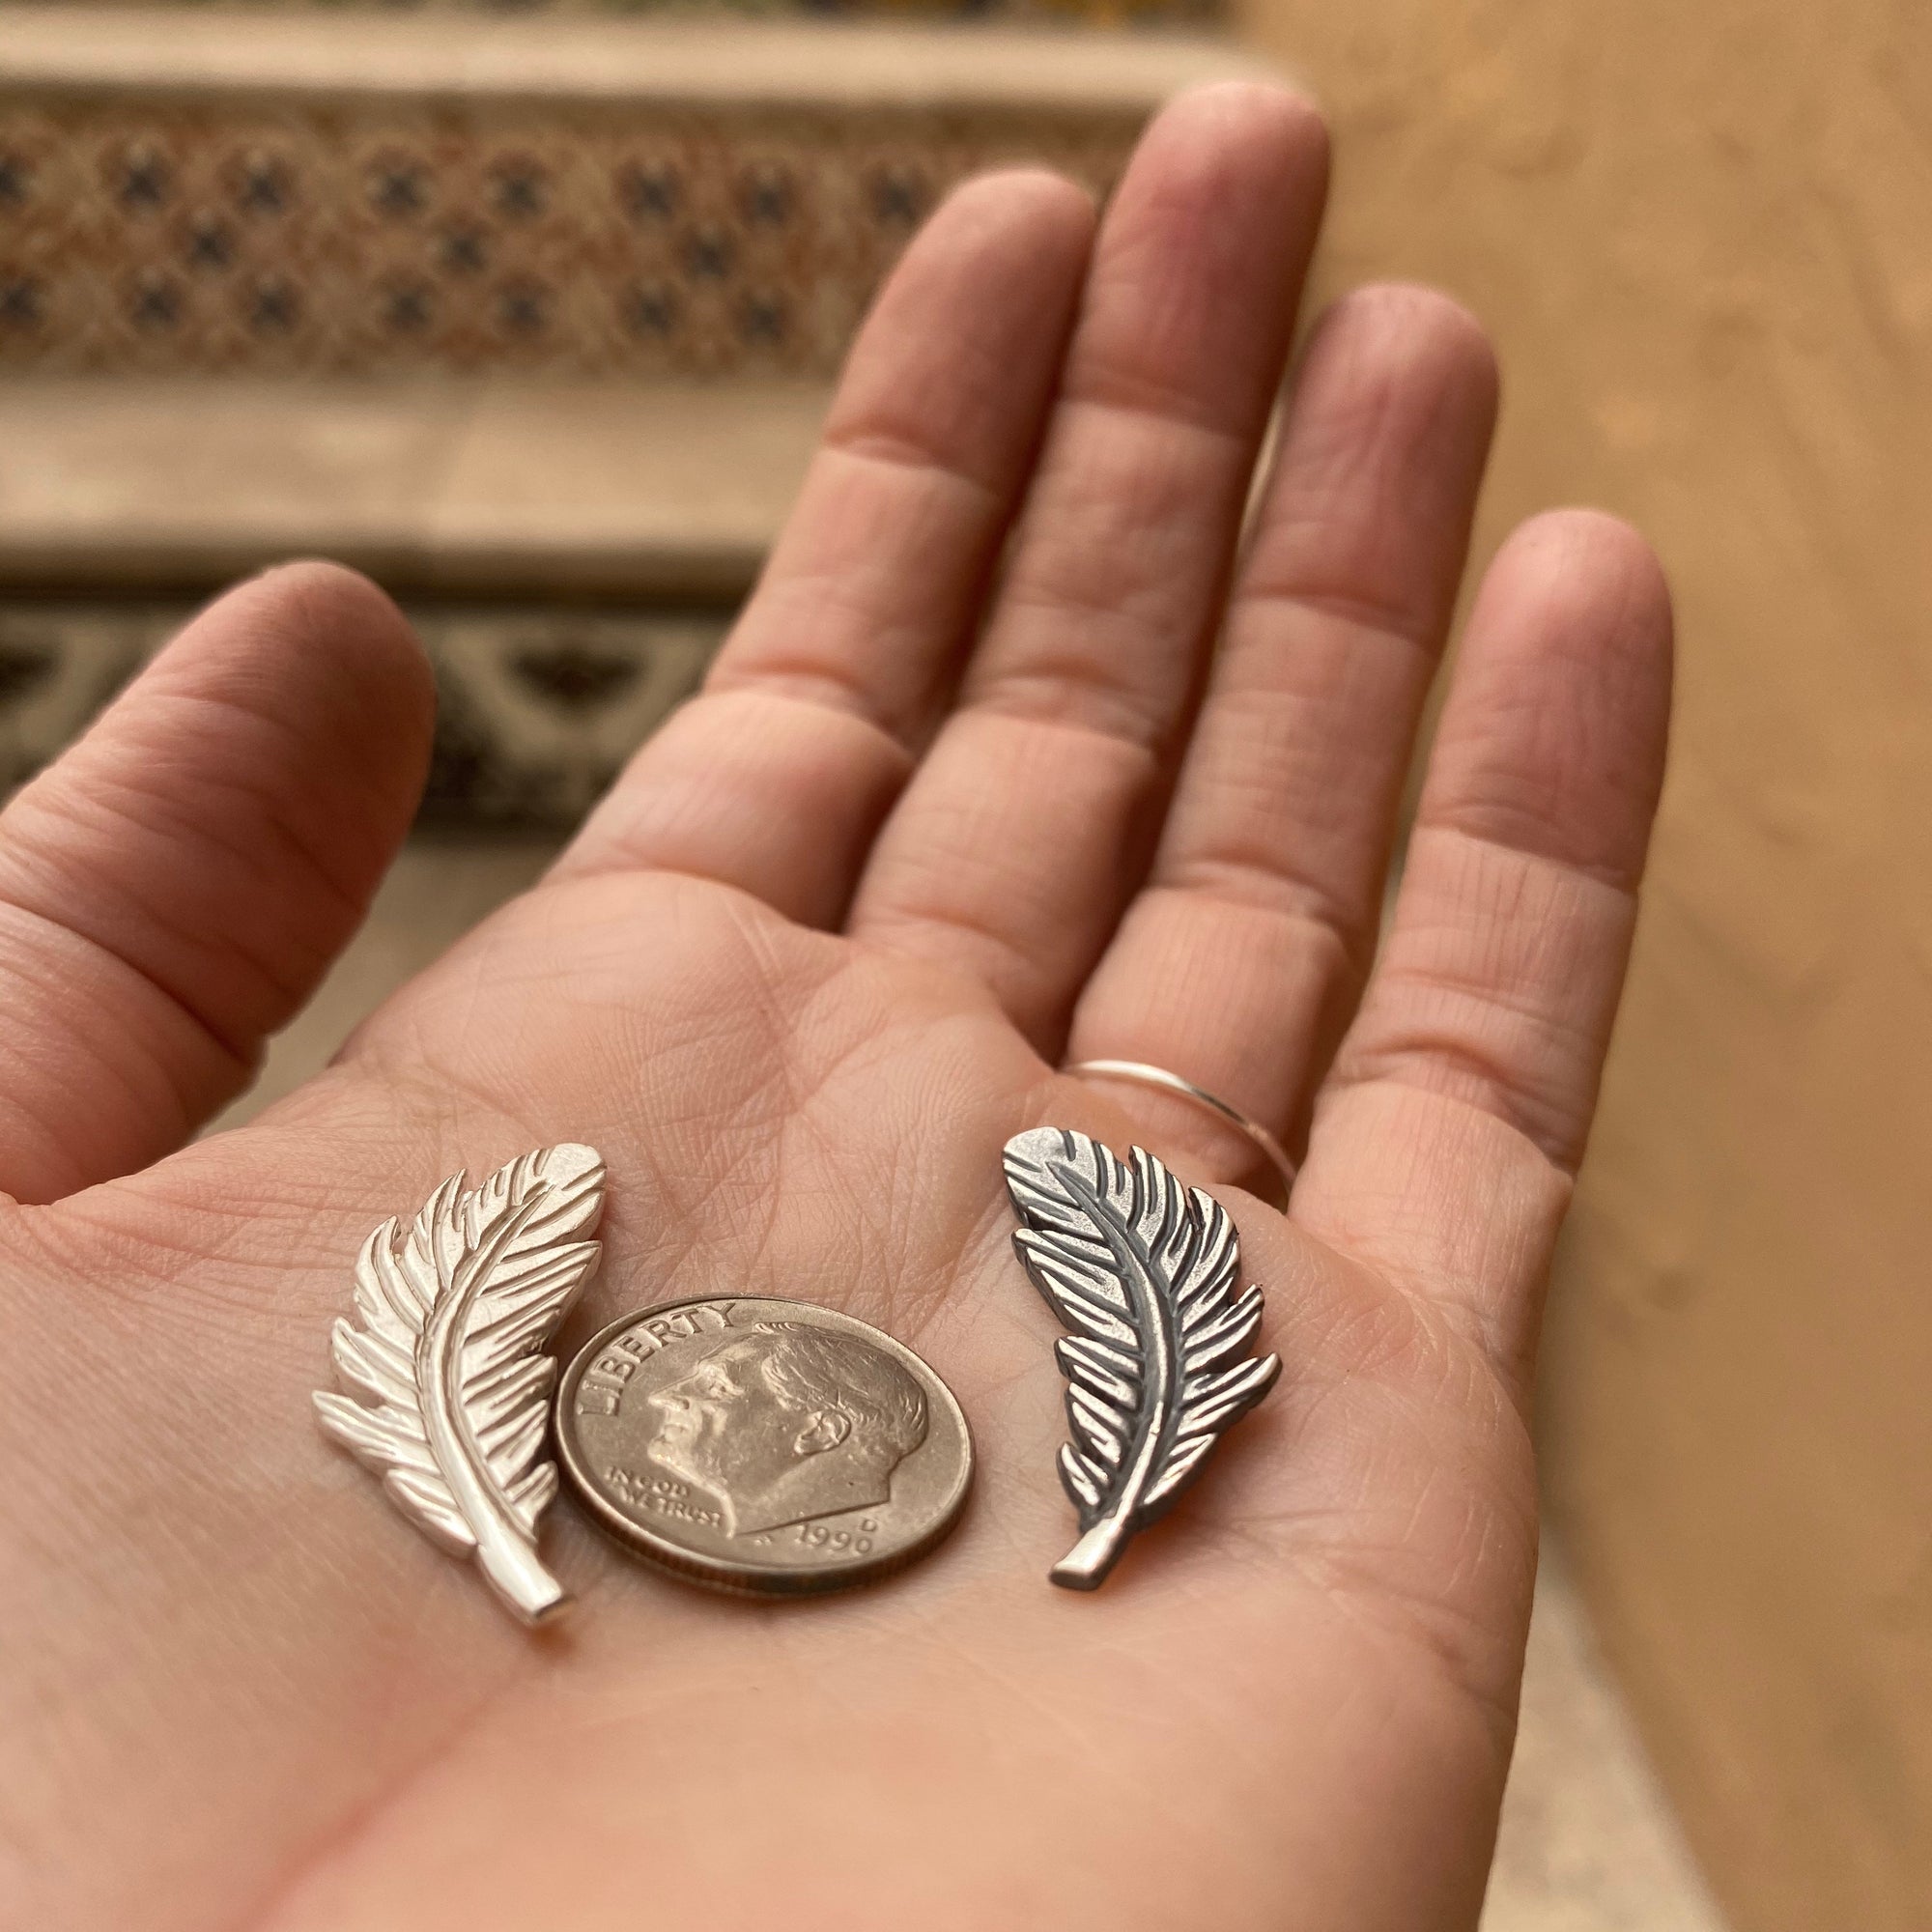 sterling silver feather casting with dime for size reference 